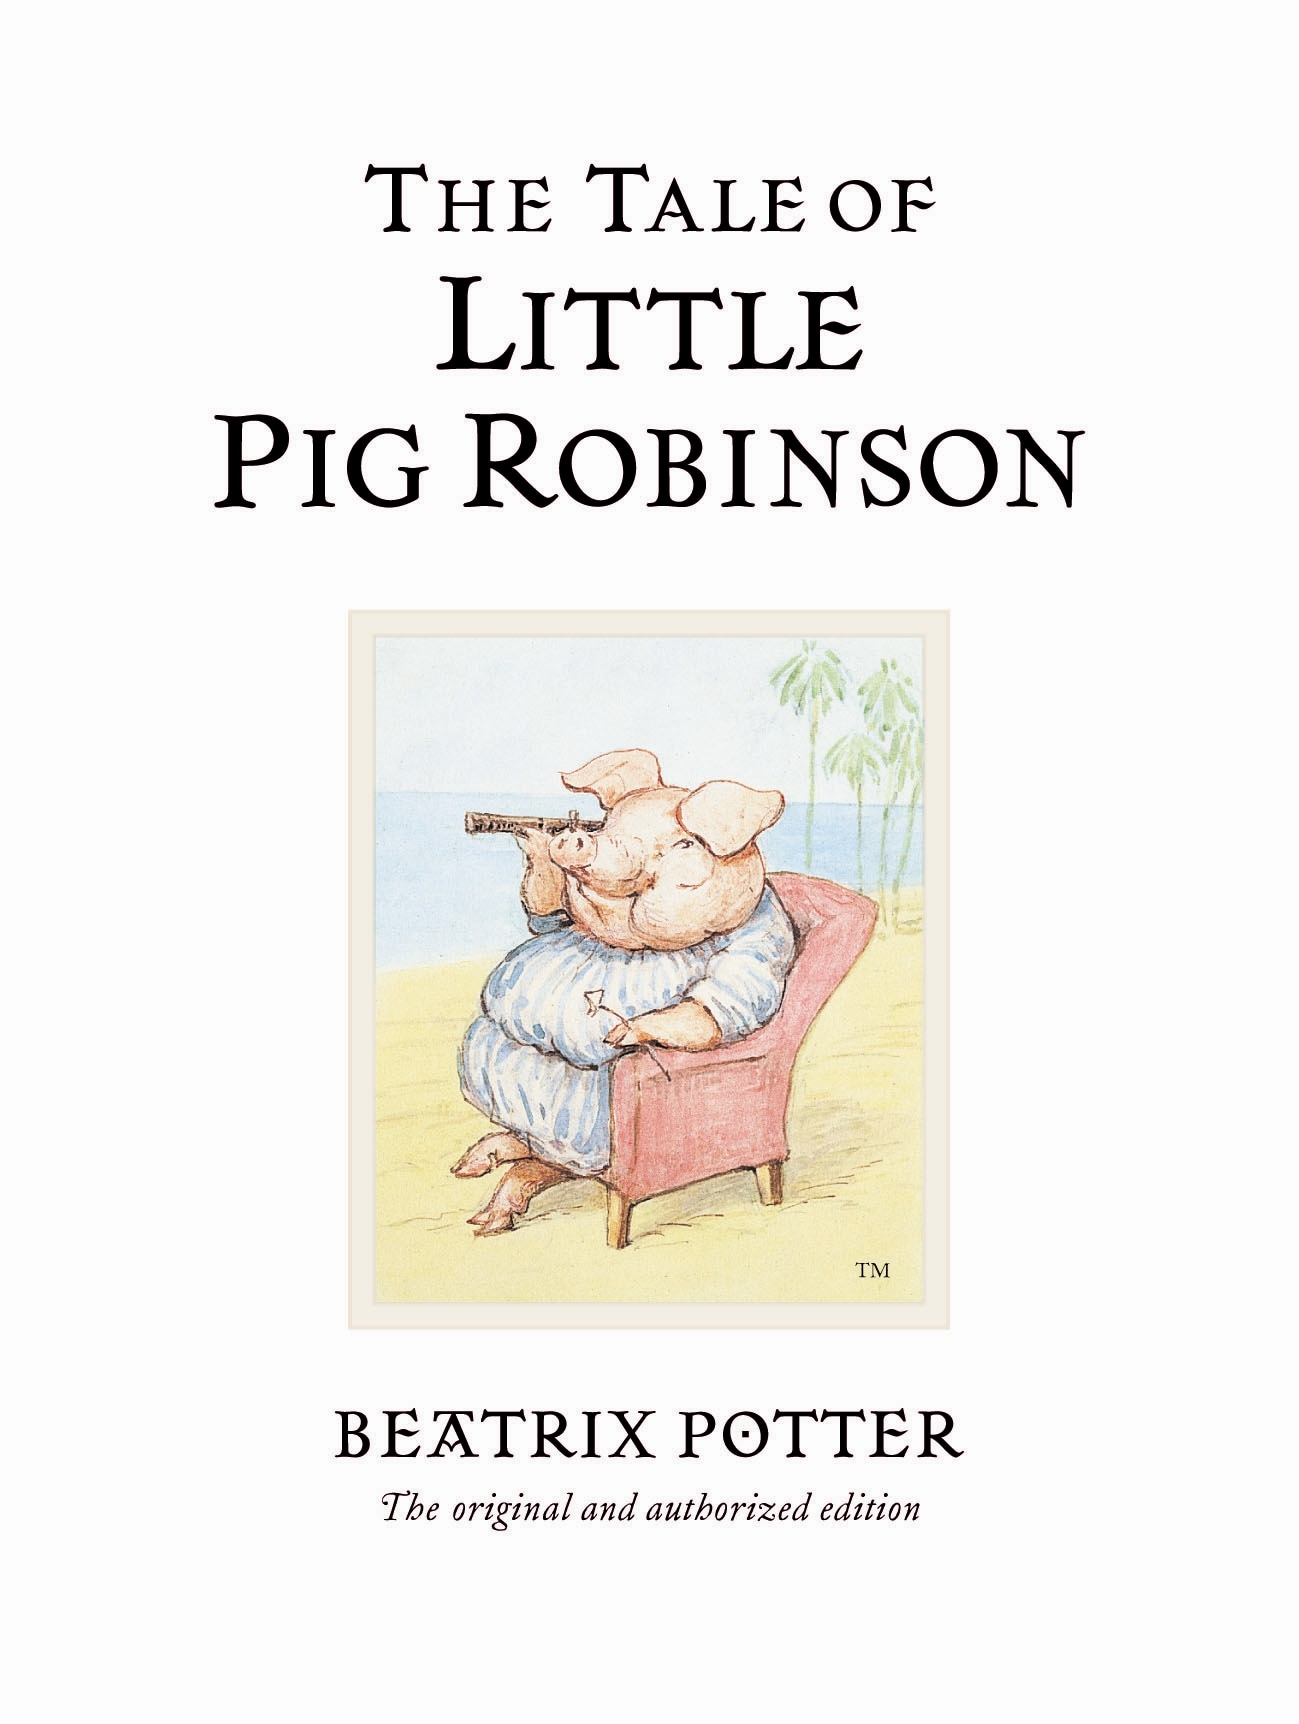 Book “The Tale of Little Pig Robinson” by Beatrix Potter — March 7, 2002